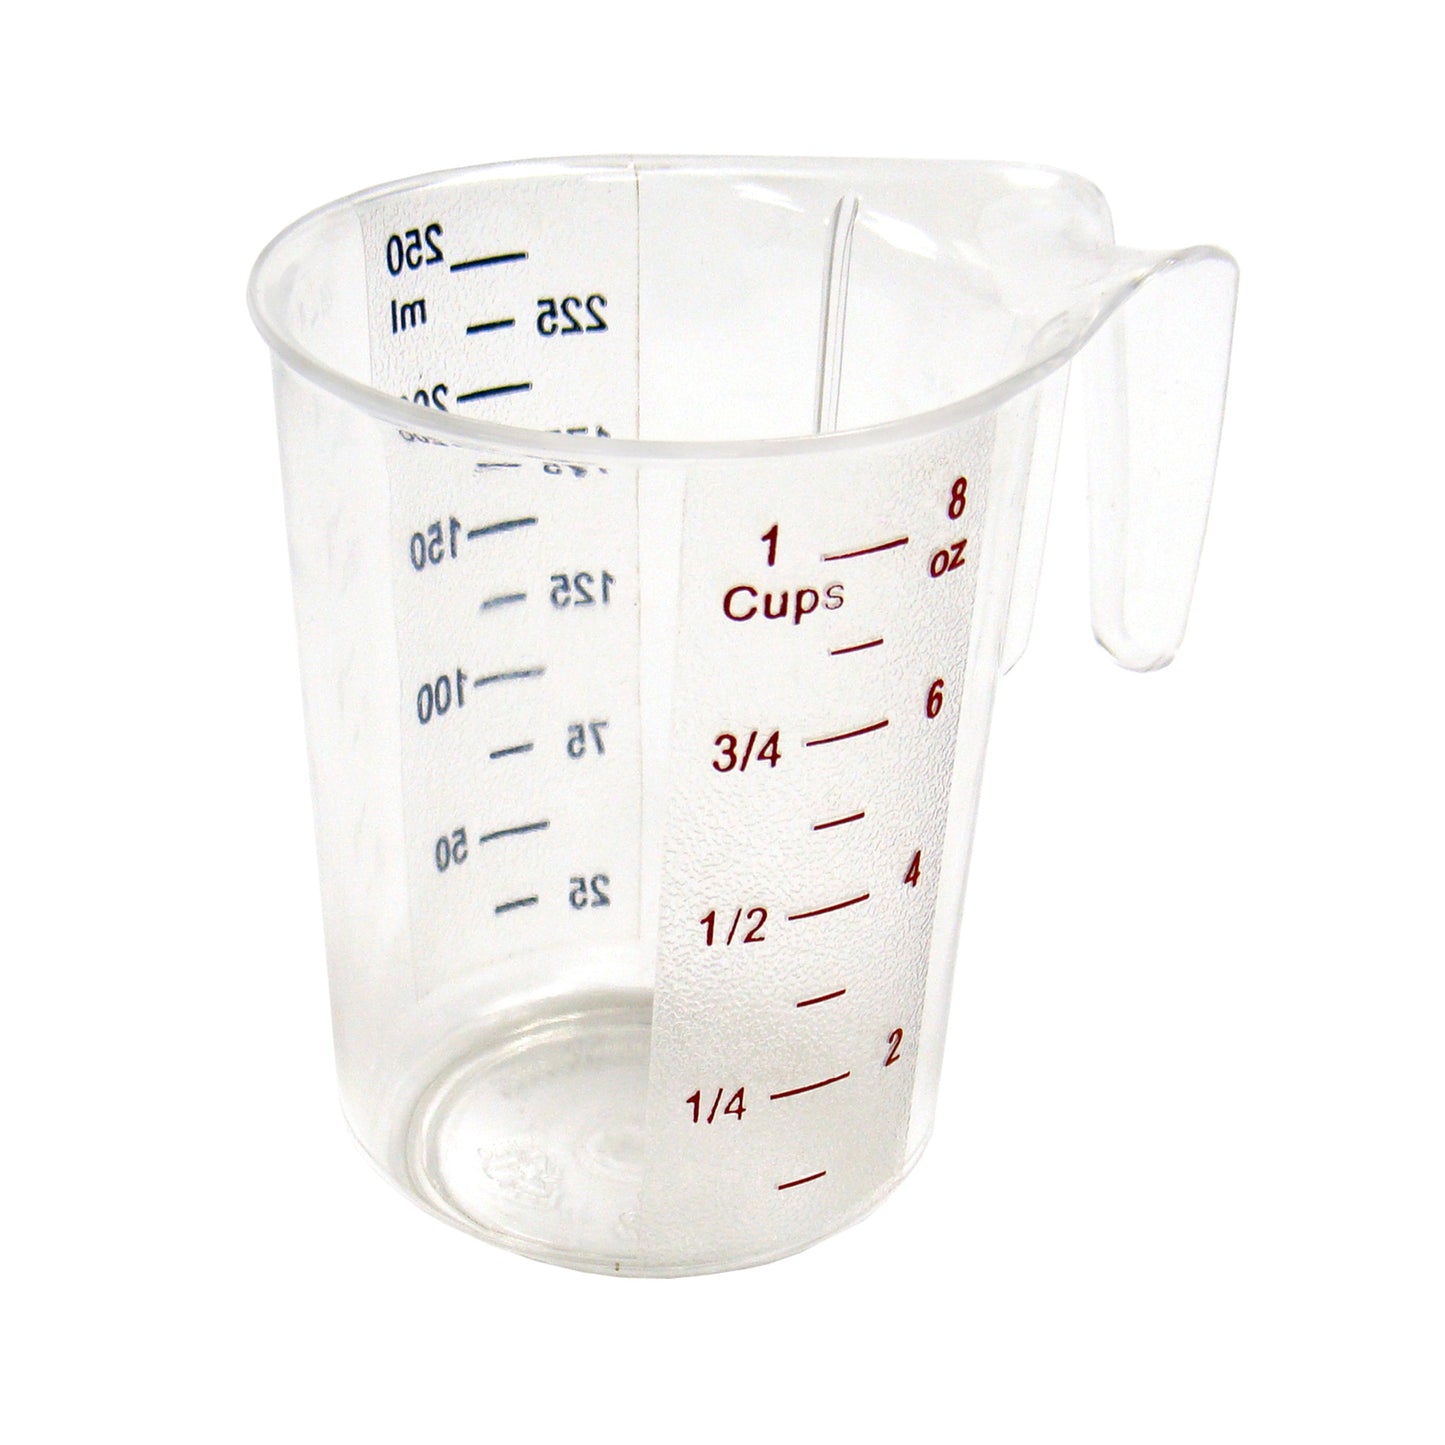 Polycarbonate Measuring Cup with Color Graduations - 1 Cup